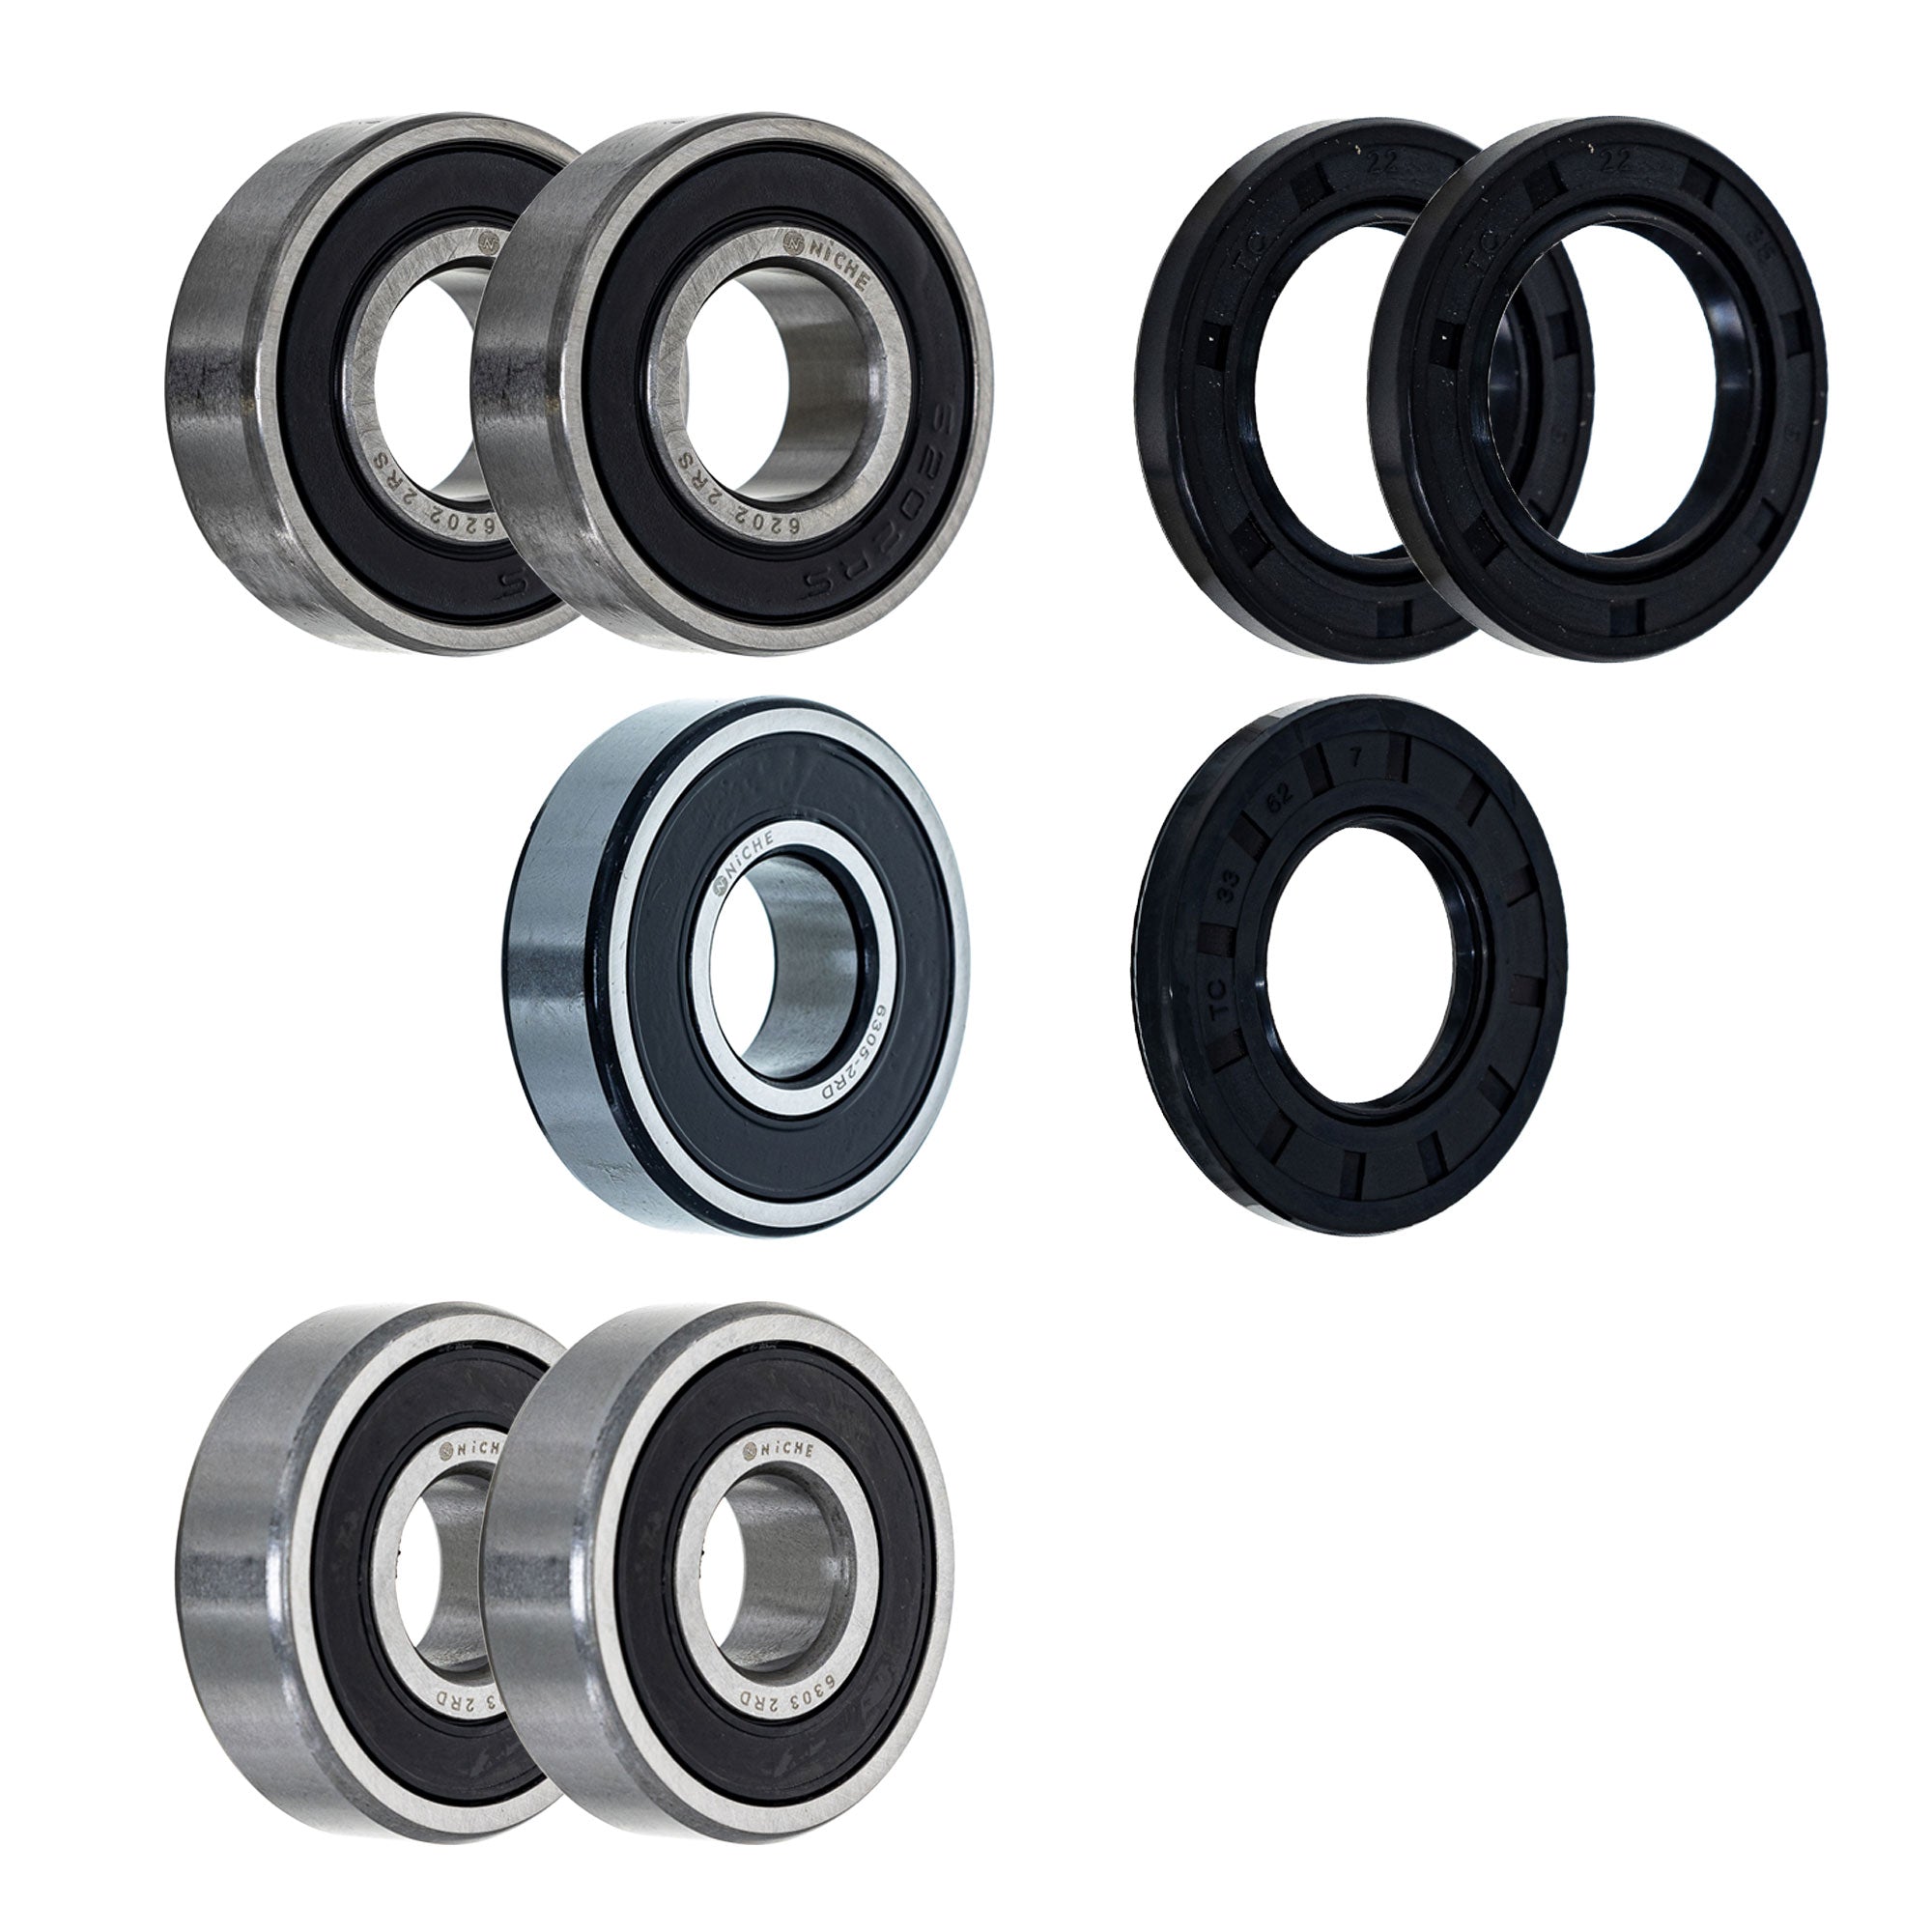 Wheel Bearing Seal Kit for zOTHER Ref No DR650S NICHE MK1008692